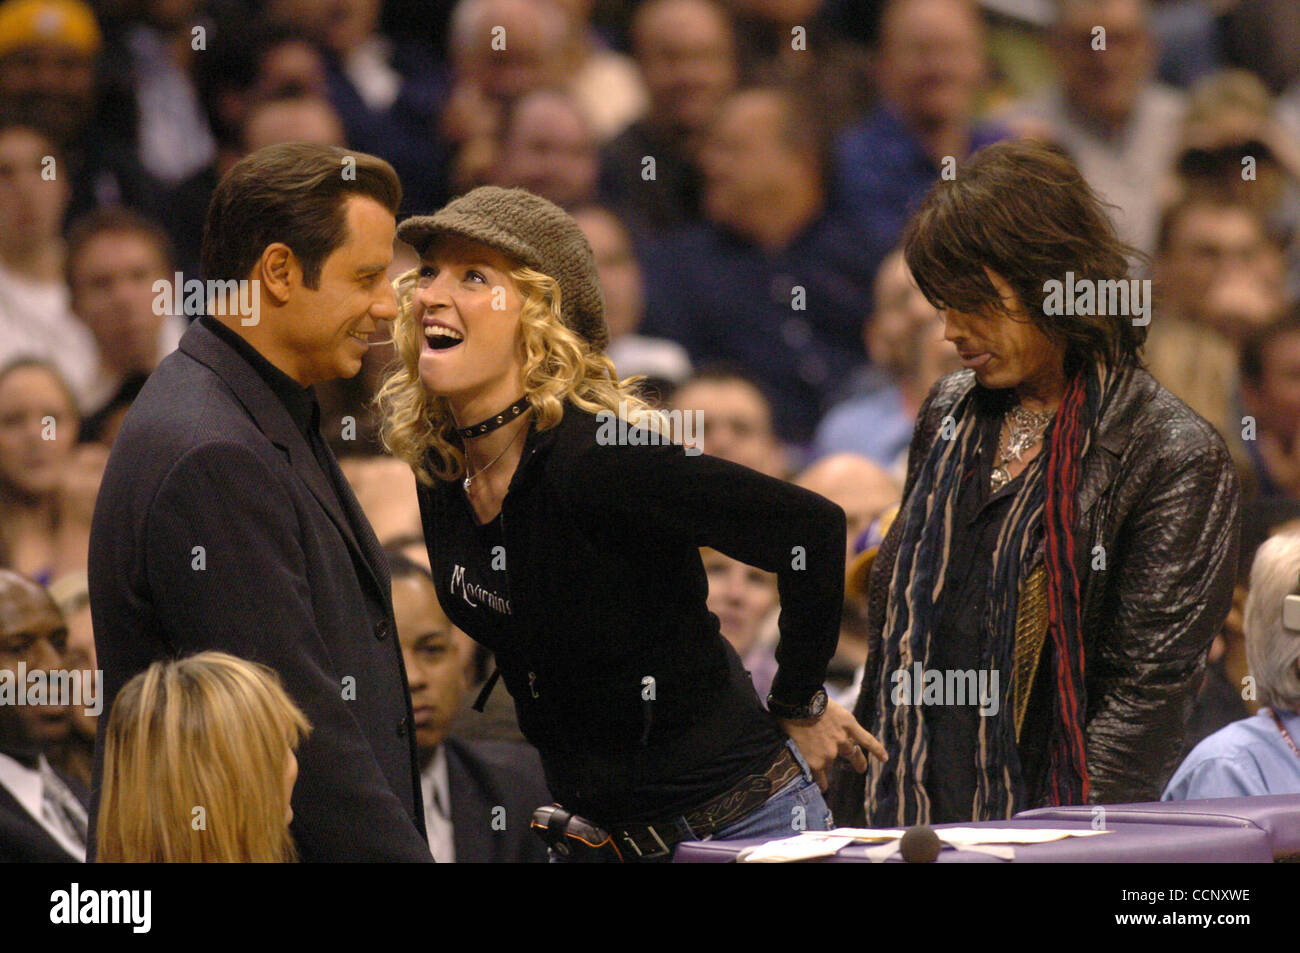 Feb 27, 2004; Los Angeles, CA, USA; Actors JOHN TRAVOLTA, UMA THURMAN and musician STEVEN TYLER of 'Aerosmith' use Staples Center, during a Los Angeles Lakers game against the Sacramento Kings, as their stage while filming the sequel to 'Get Shortie' called 'Be Cool.' This is the first time John and Stock Photo